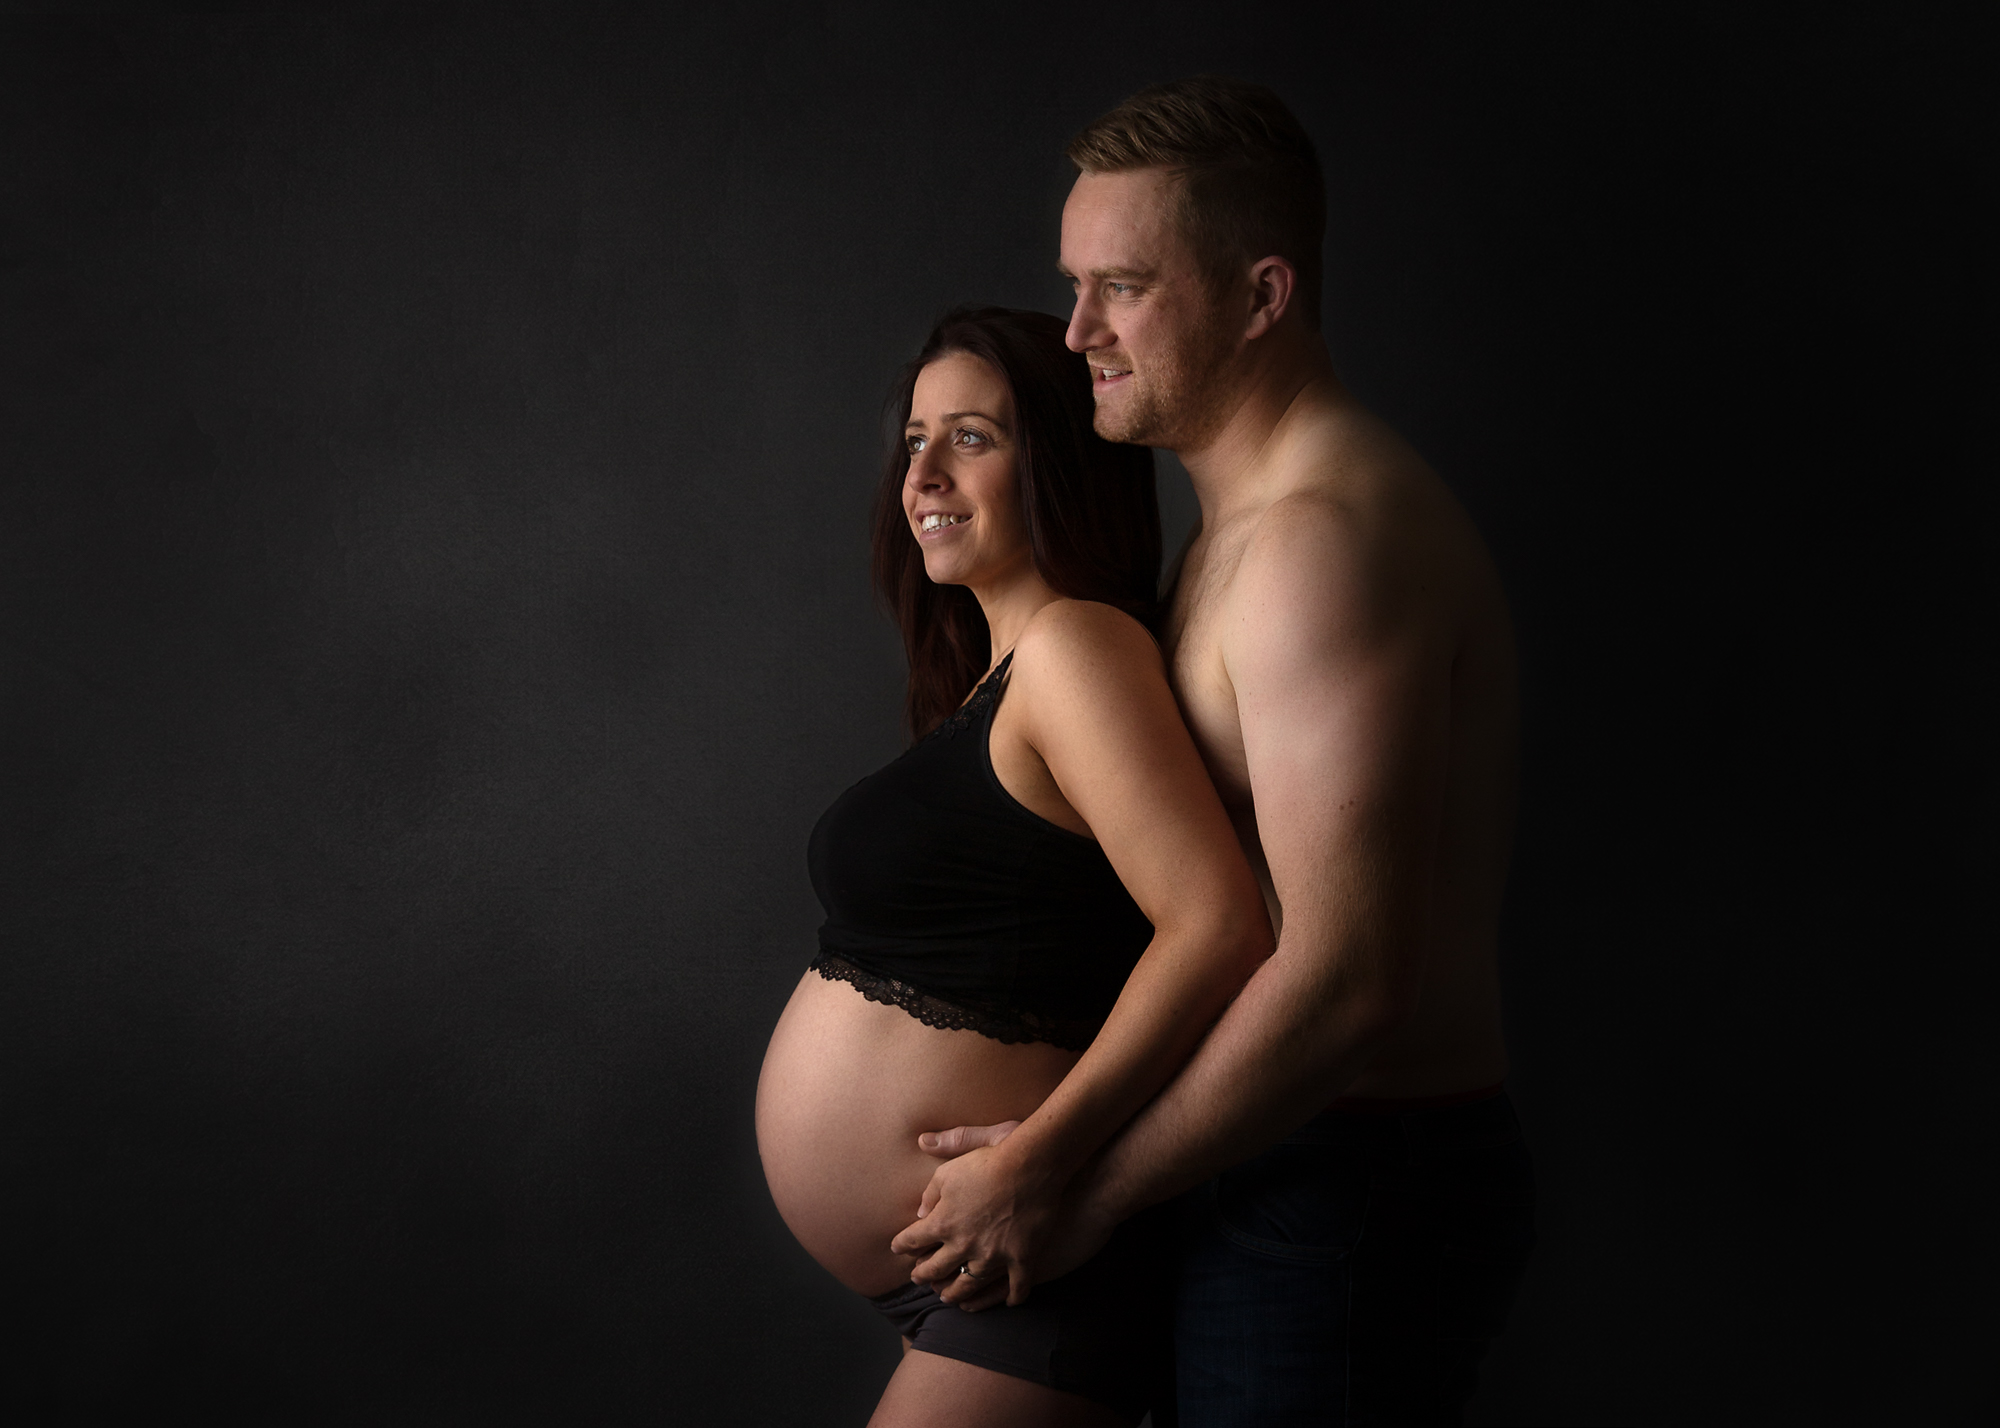 Naked couple bump to baby photos cardiff south wales